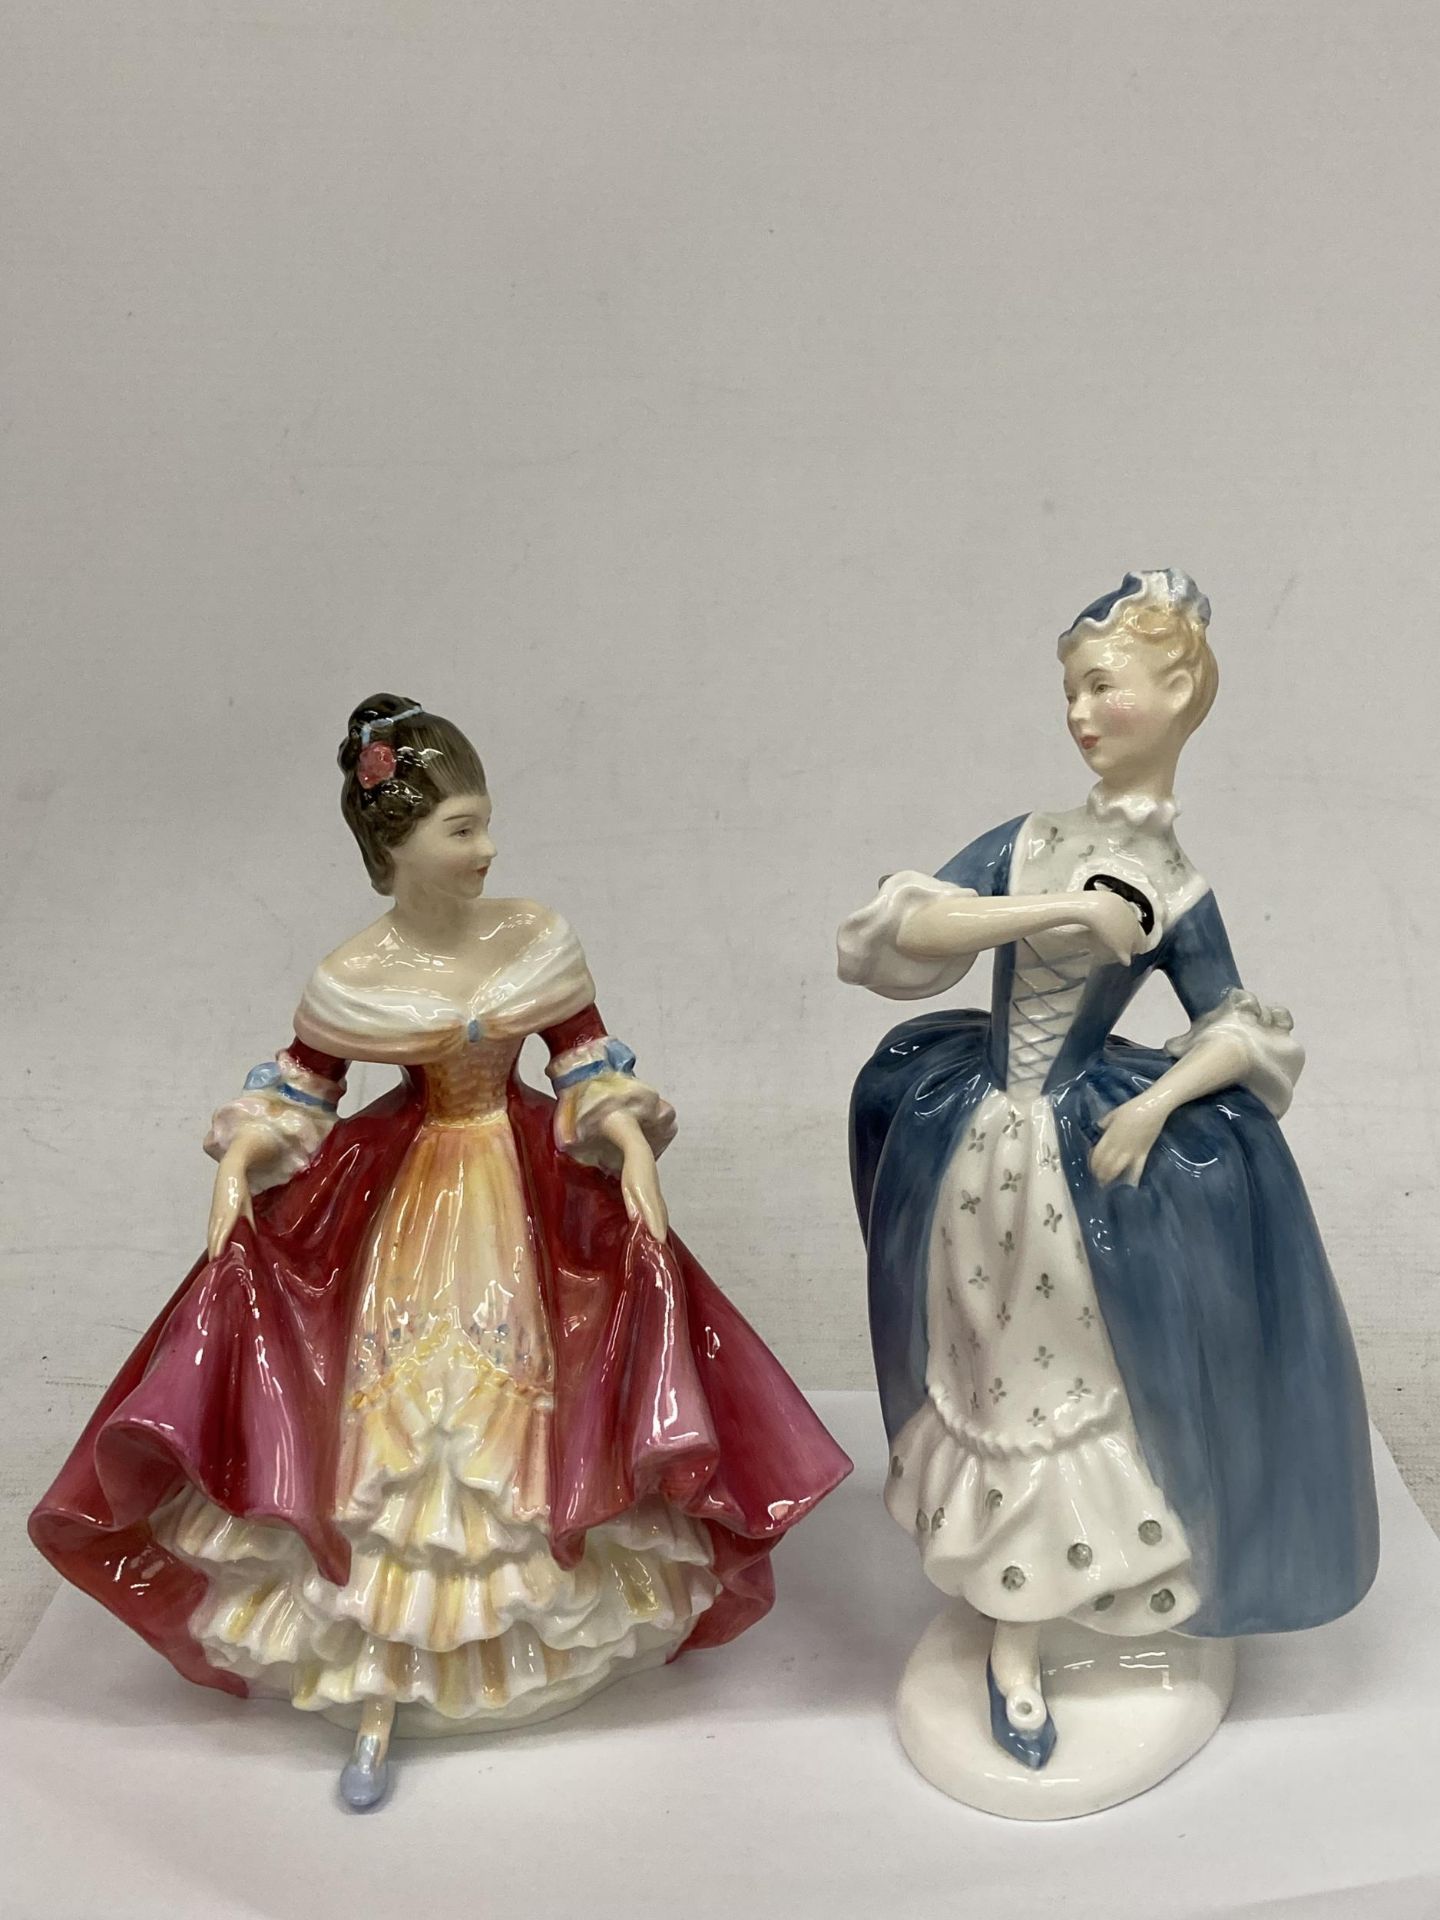 TWO ROYAL DOULTON FIGURINES "MASQUERADE" AND "SOUTHERN BELLE"